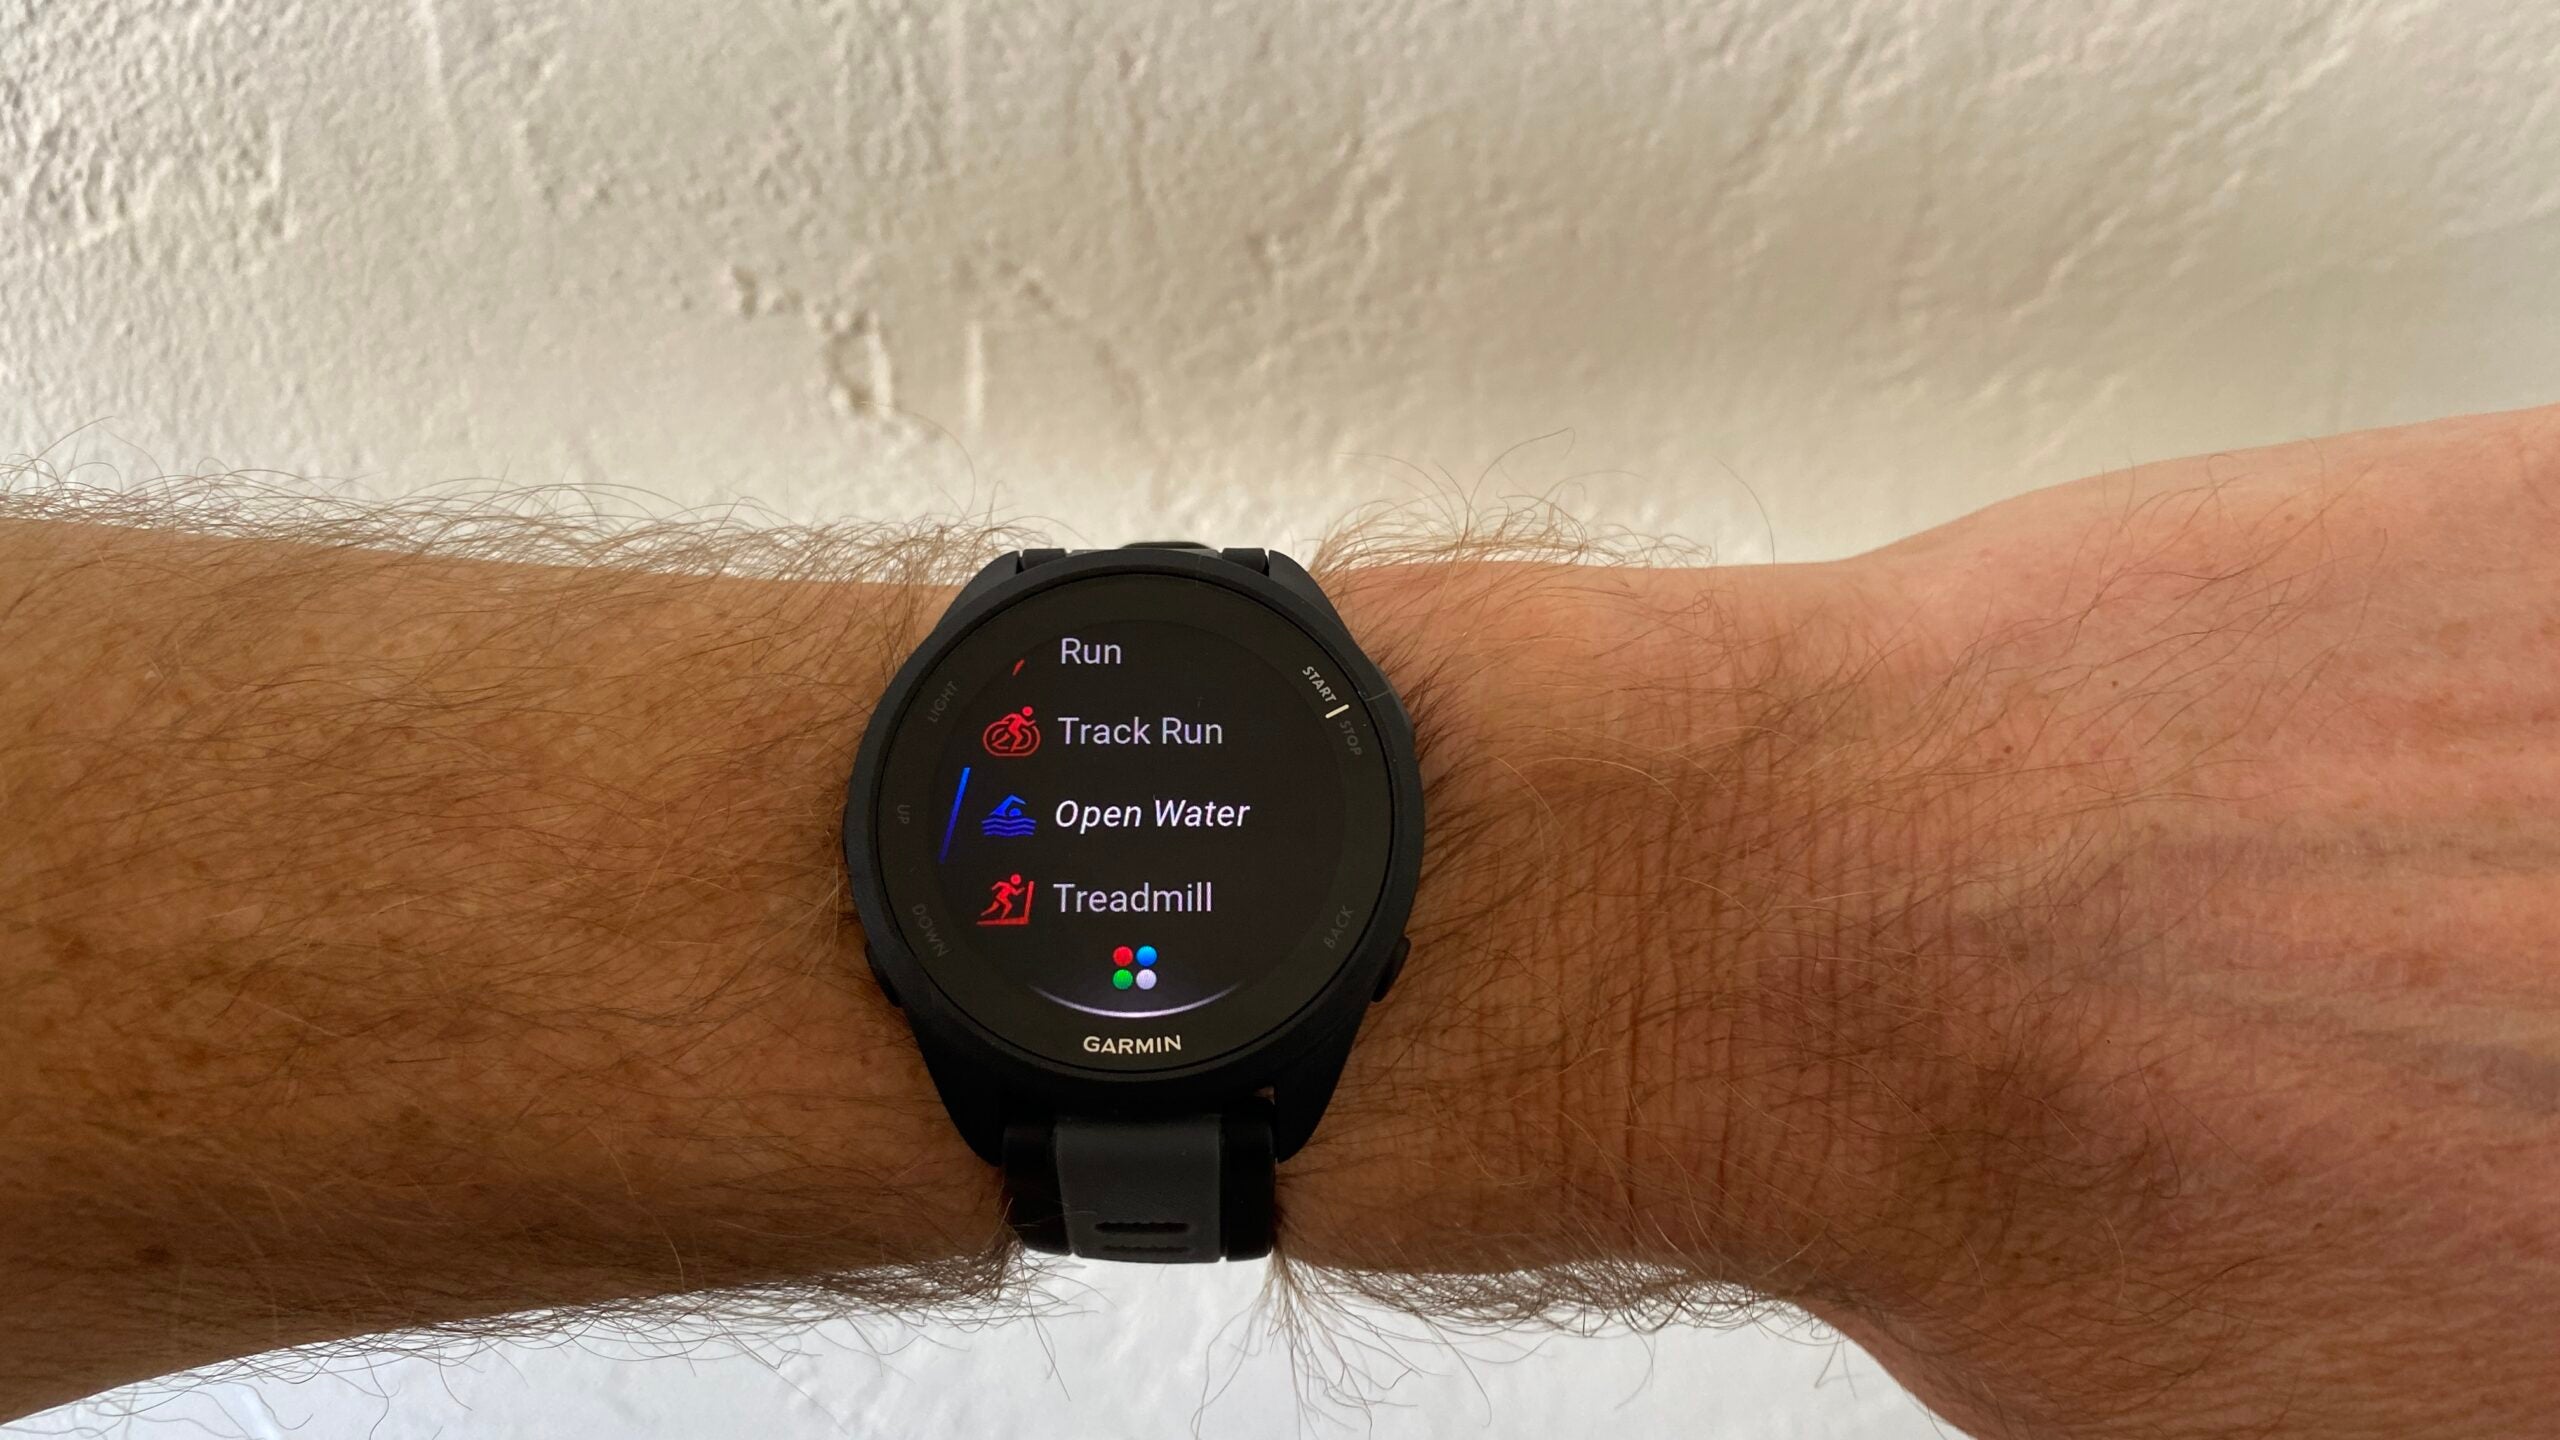 The Garmin Forerunner 165 has activity modes that include open-water swimming, track mode, and running with power, but no triathlon or multisport modes.